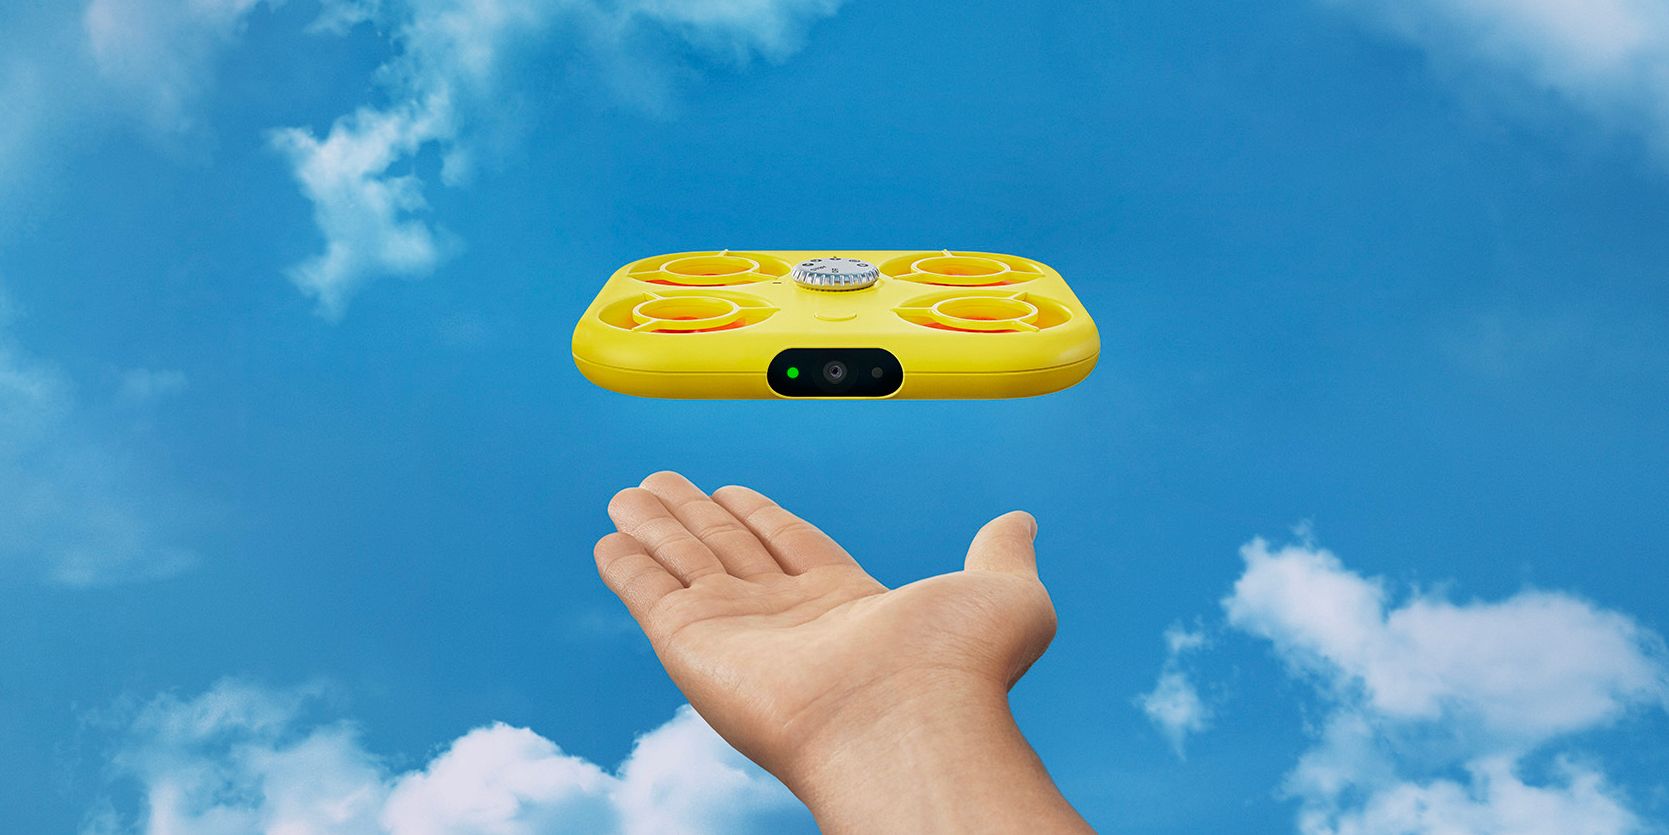 Where You Can Buy The Snapchat Pixy Drone (And How Much It Costs)